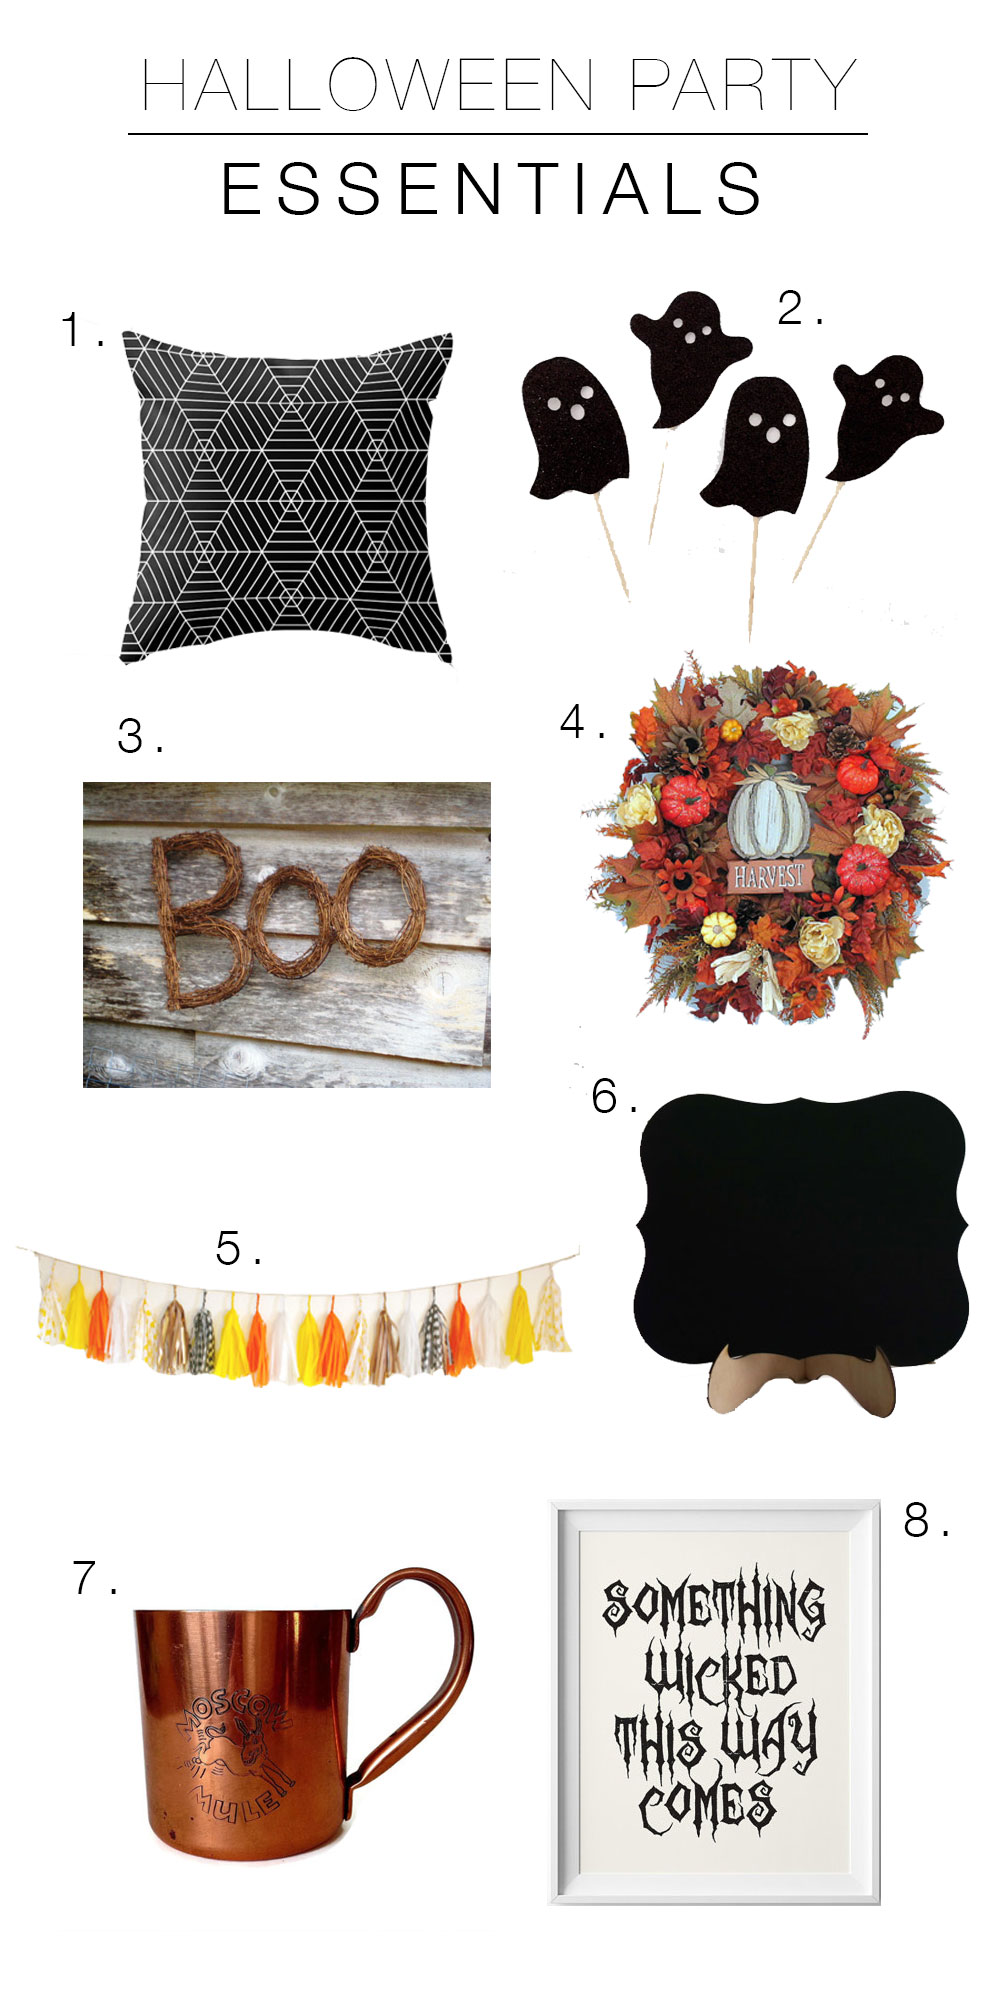 Halloween party hosting tips with Etsy products including copper cups, paper decorations and pumpkin styling